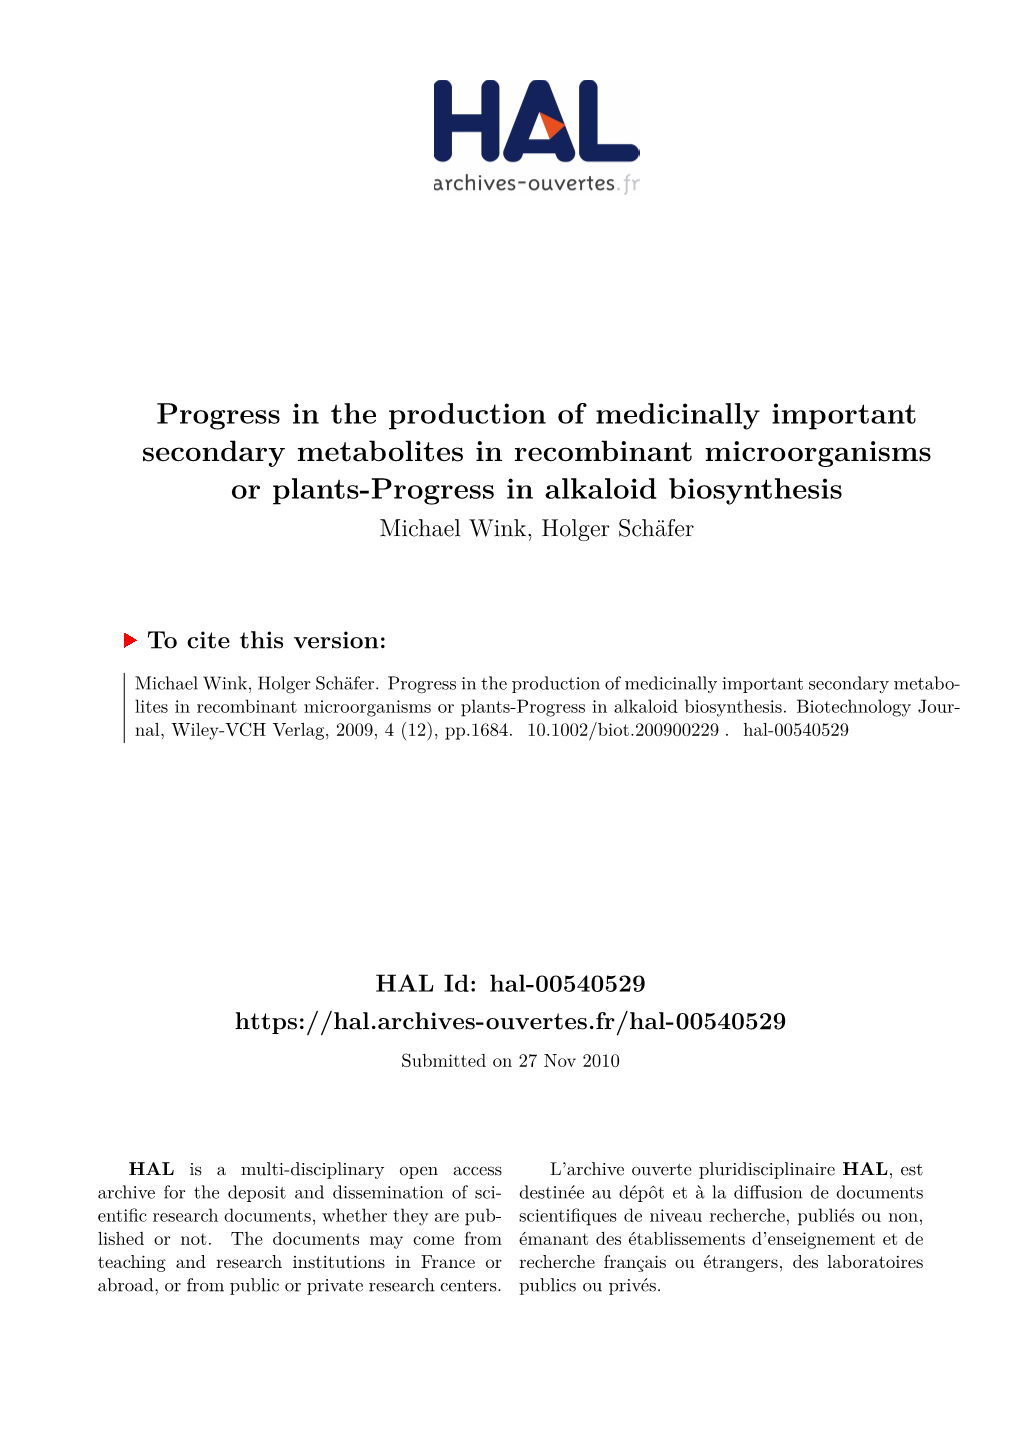 Progress in the Production of Medicinally Important Secondary